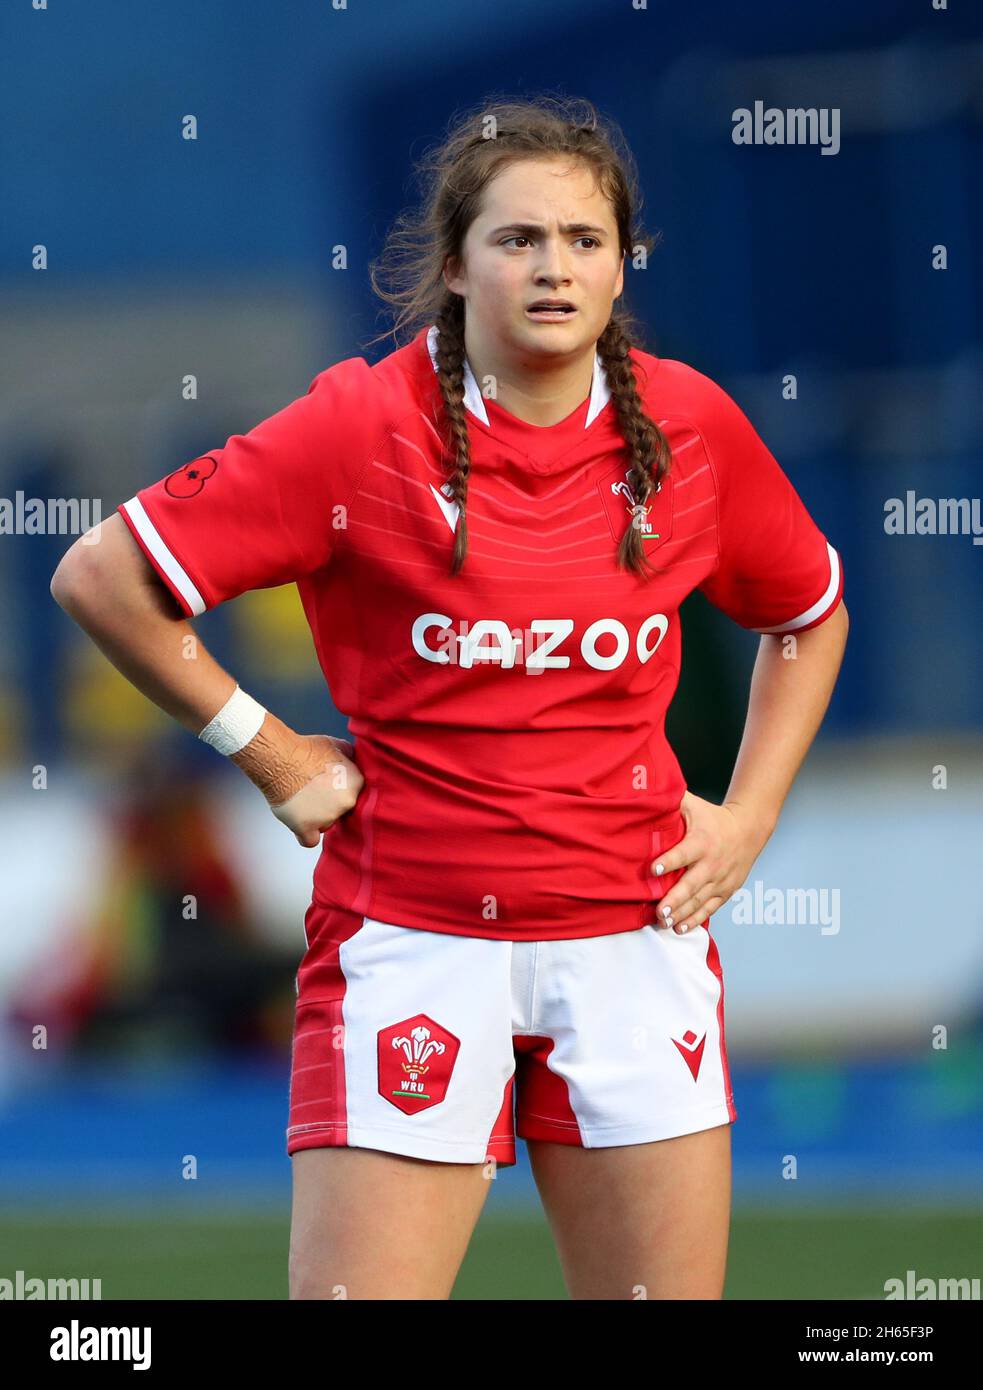 Wales' Caitlin Lewis during the Autumn International match at Cardiff Arms park, Cardiff. Picture date: Saturday November 13, 2021. See PA story RUGBYU Wales Women. Photo credit should read: Bradley Collyer/PA Wire. RESTRICTIONS: Use subject to restrictions. Editorial use only, no commercial use without prior consent from rights holder. Stock Photo